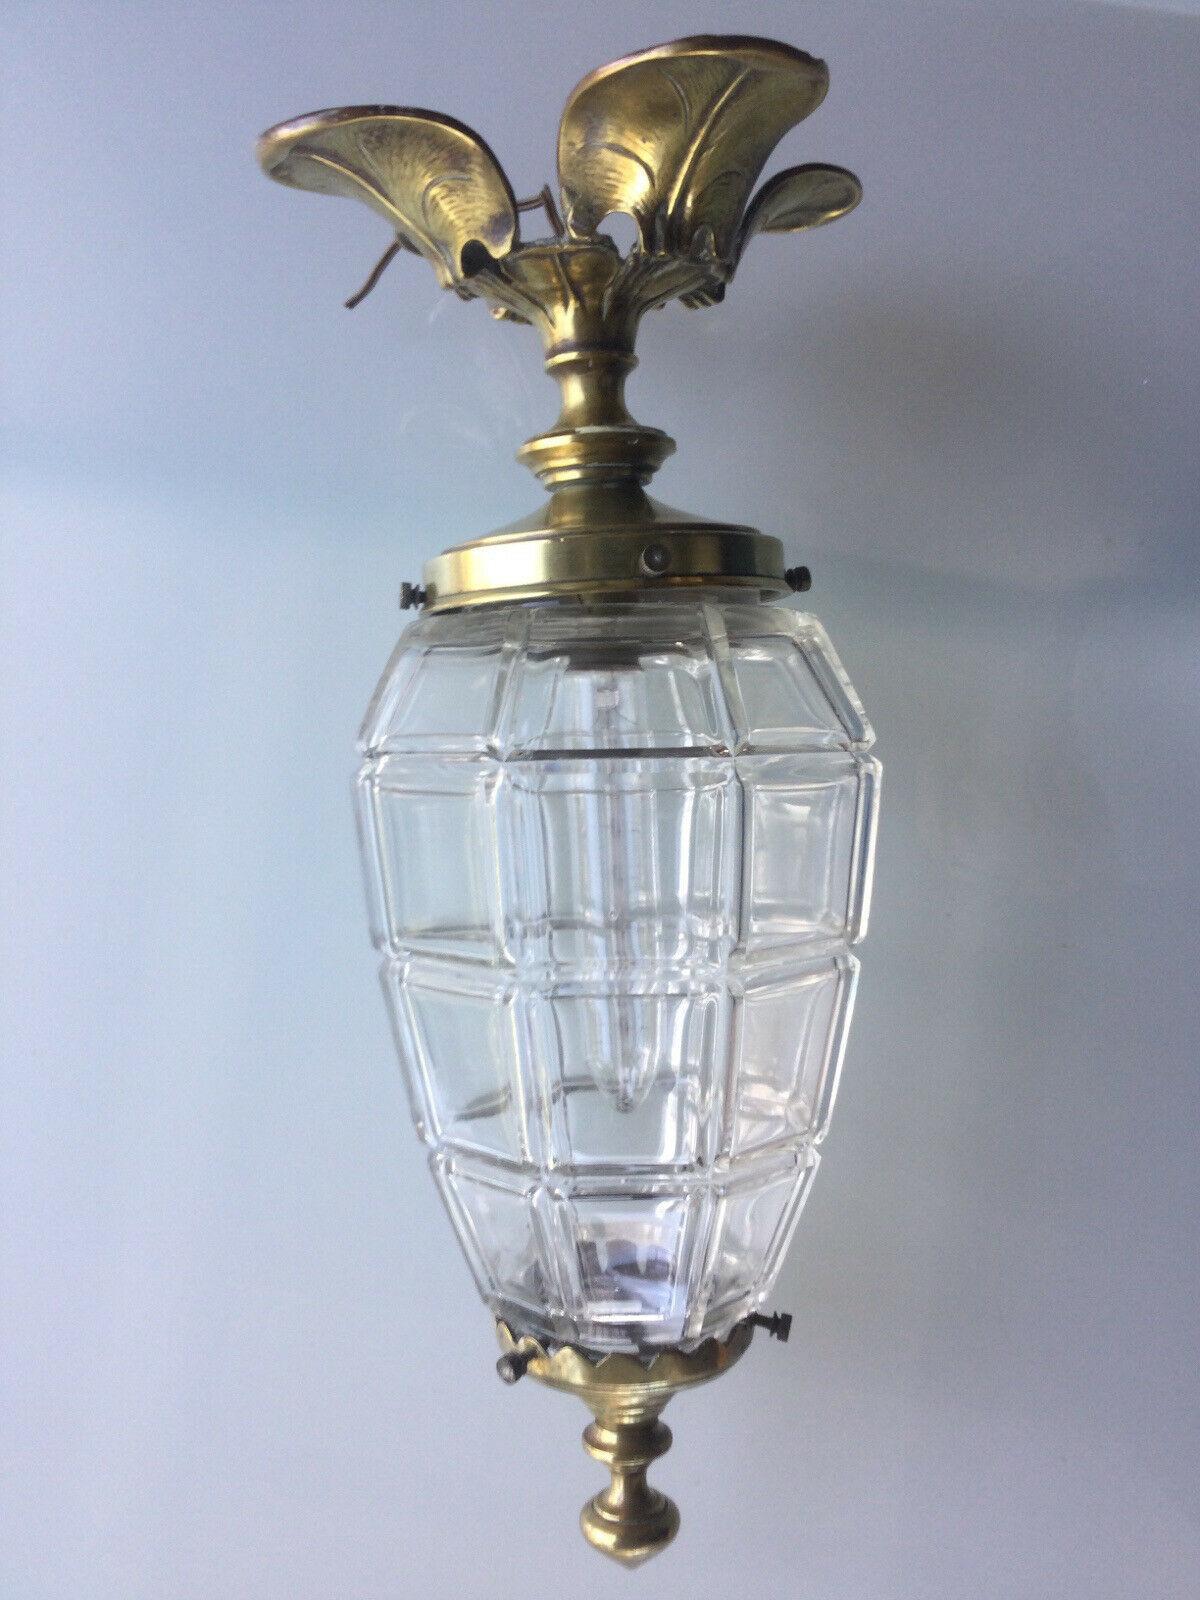 1930's French Louis XV Versailles style Nenuphar Bronze with Crystal Ceiling Lantern fixture. The style inspired by Baccarat.